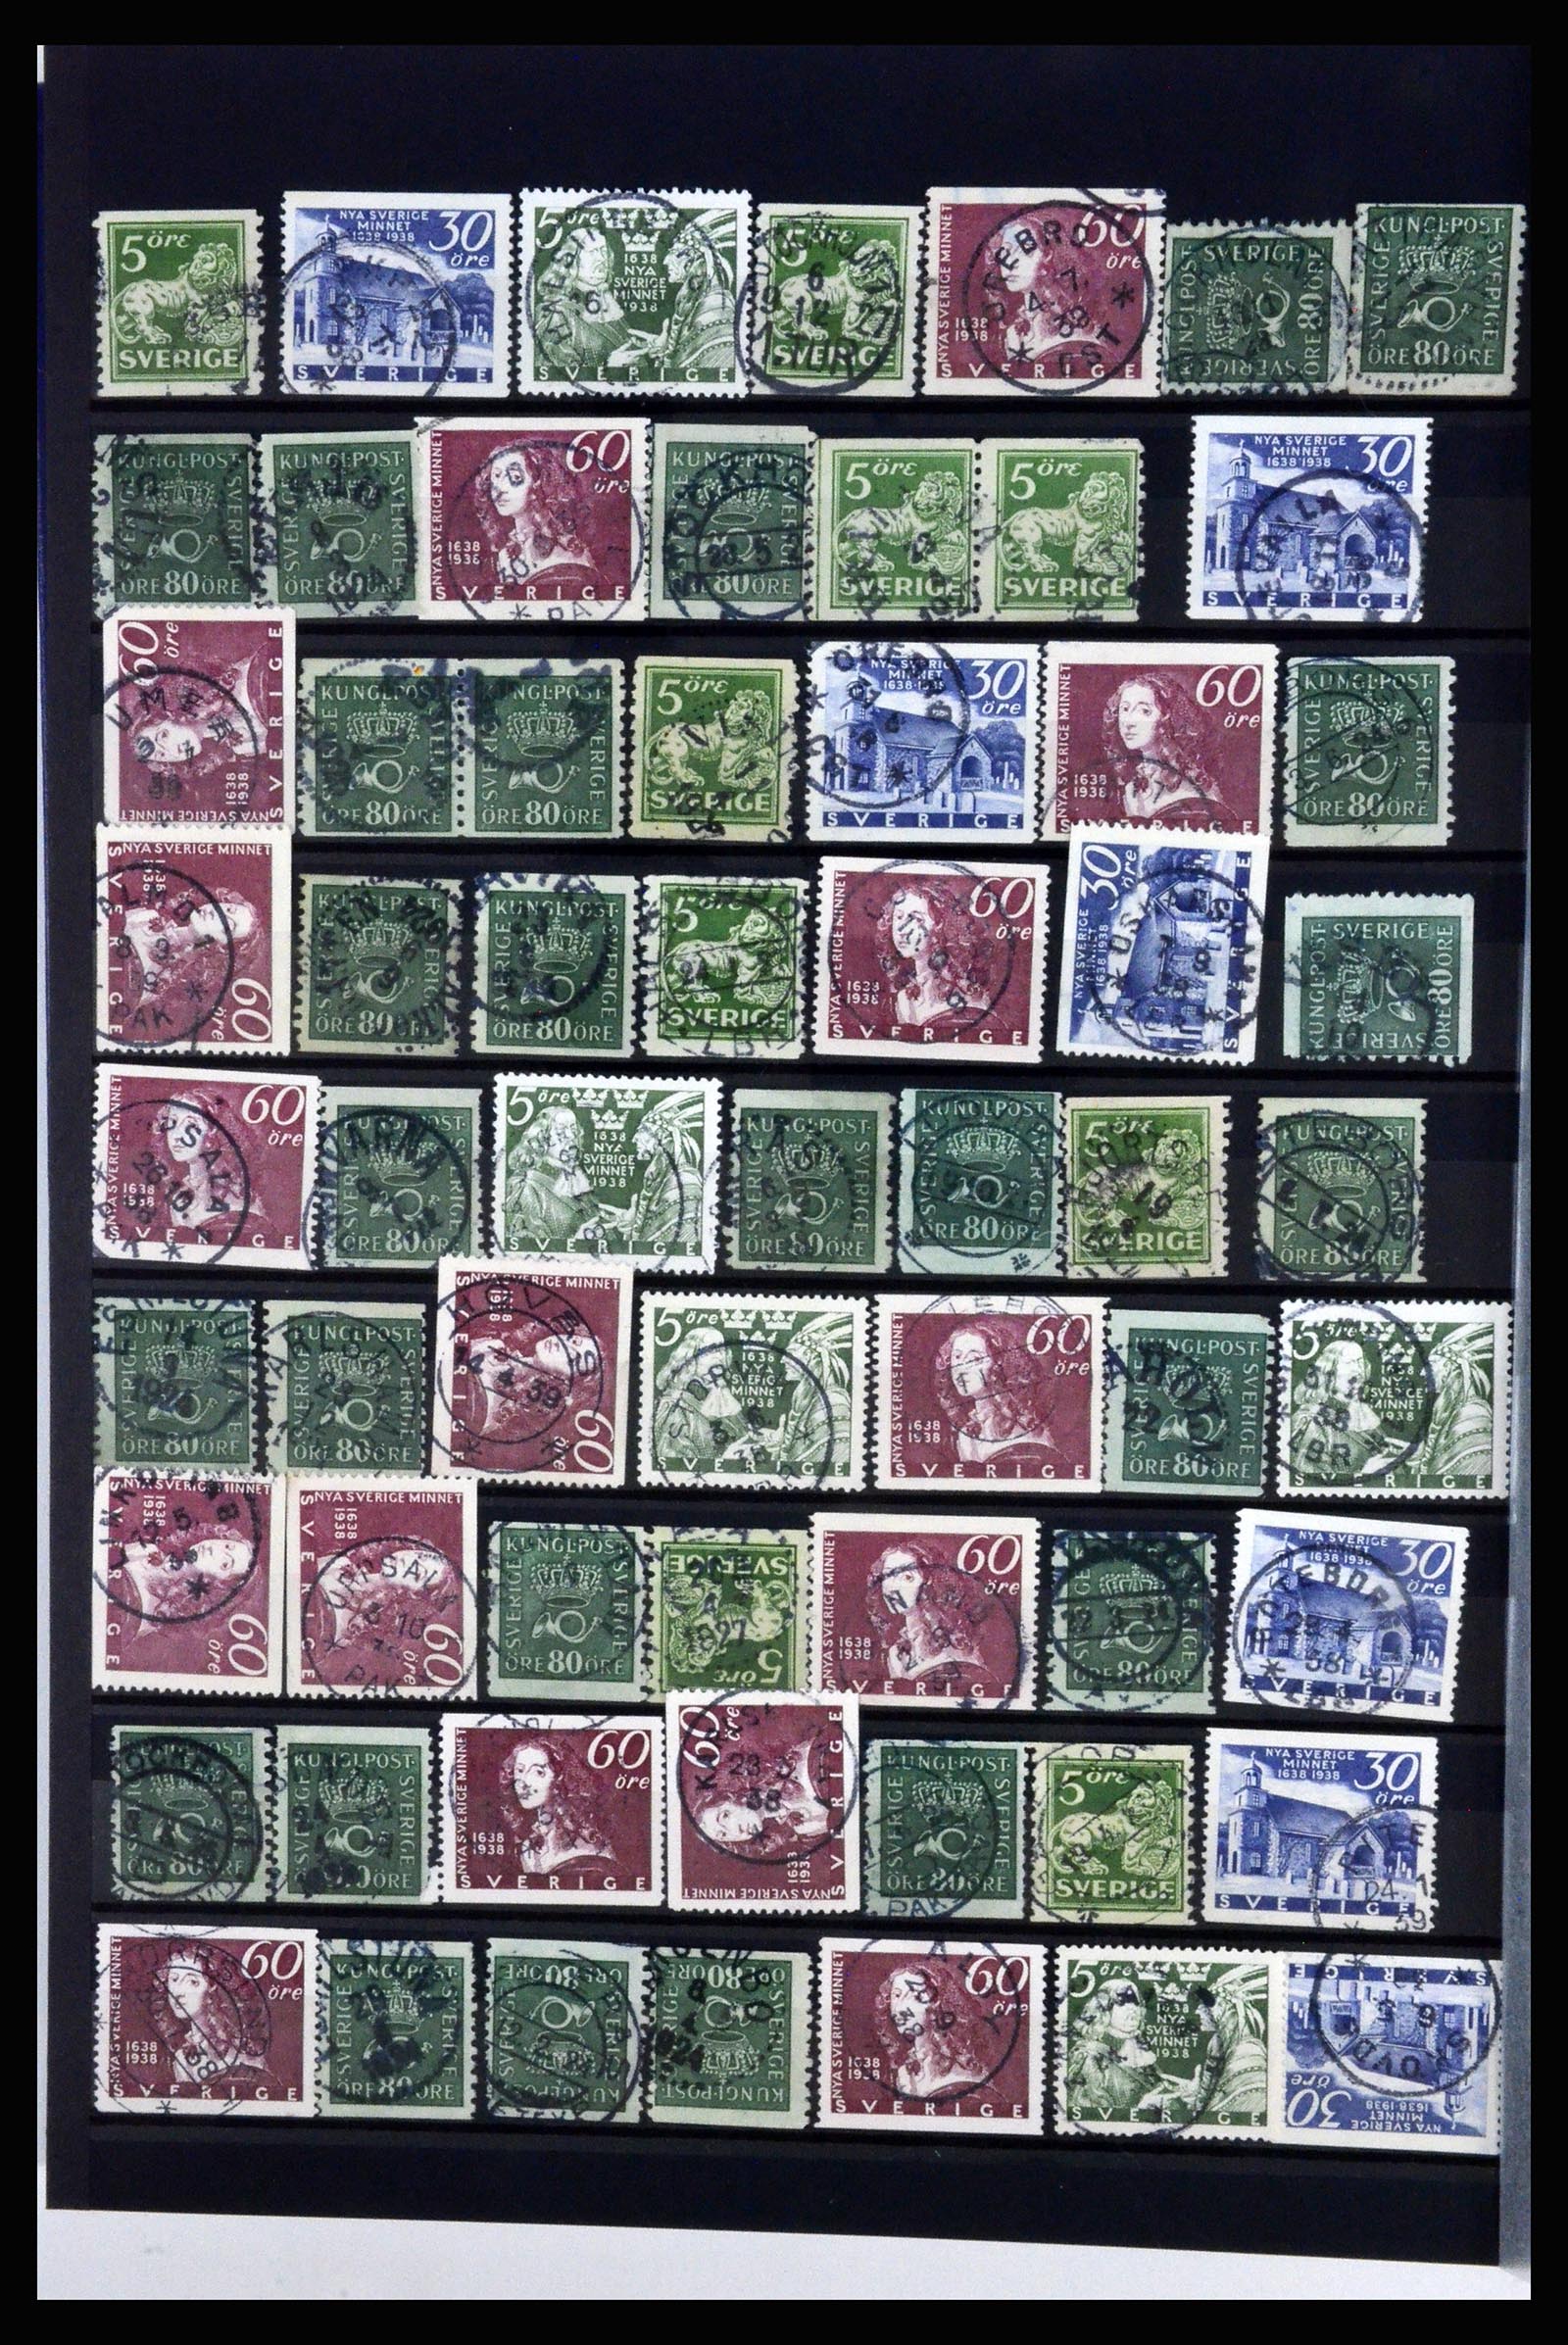 36316 060 - Stamp collection 36316 Sweden cancellations 1920-1938.